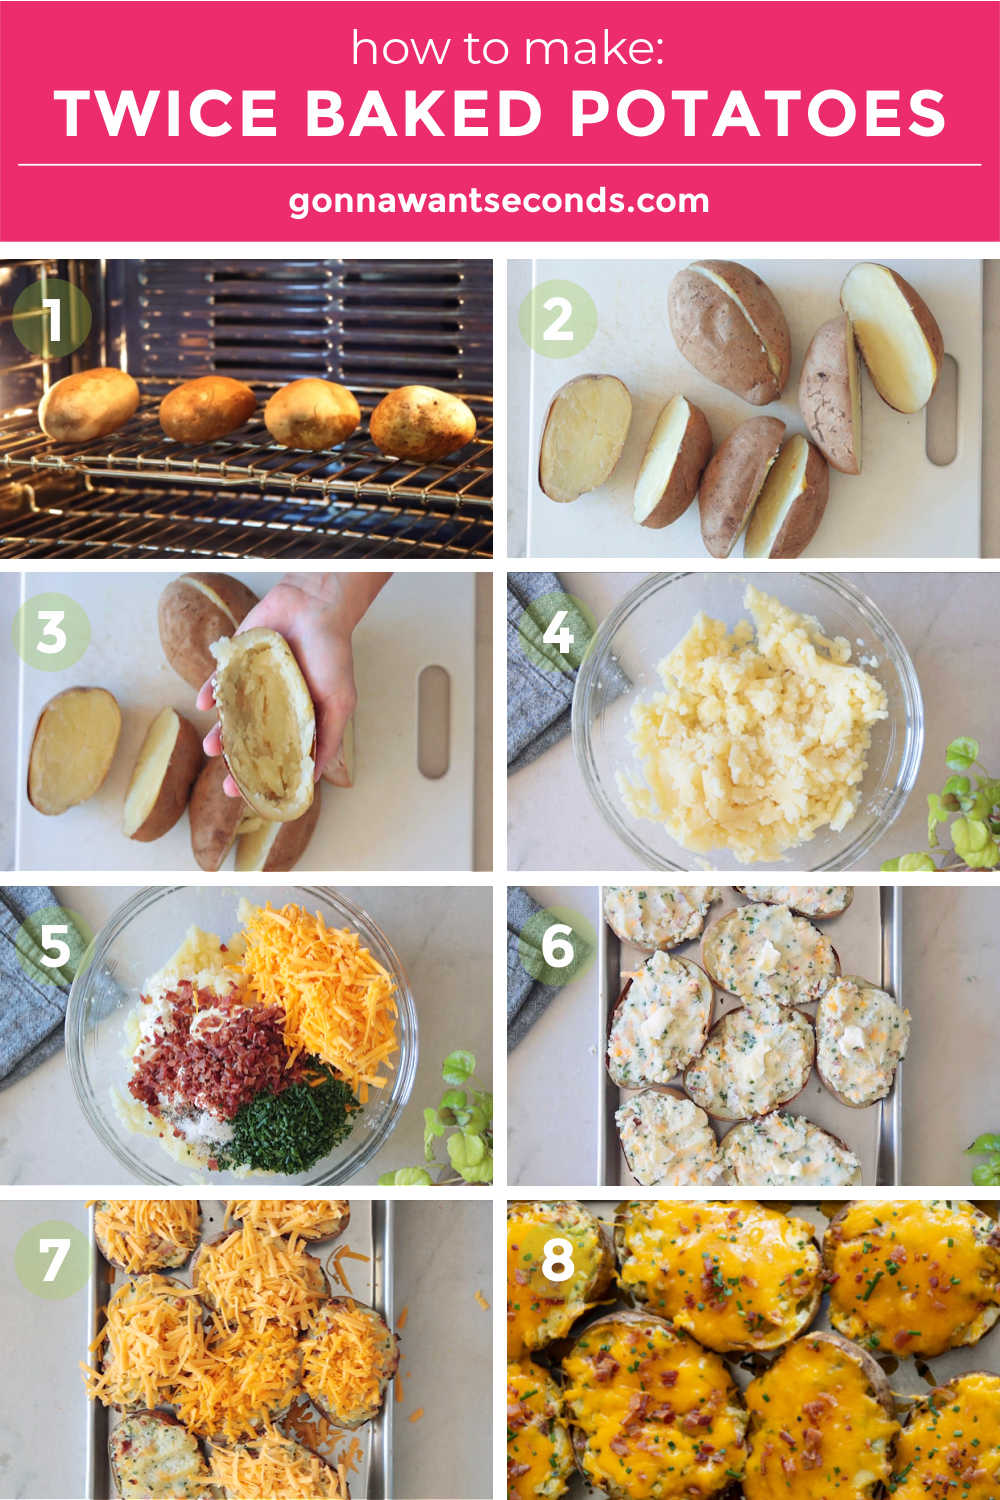 Step by step how to make twice baked potatoes